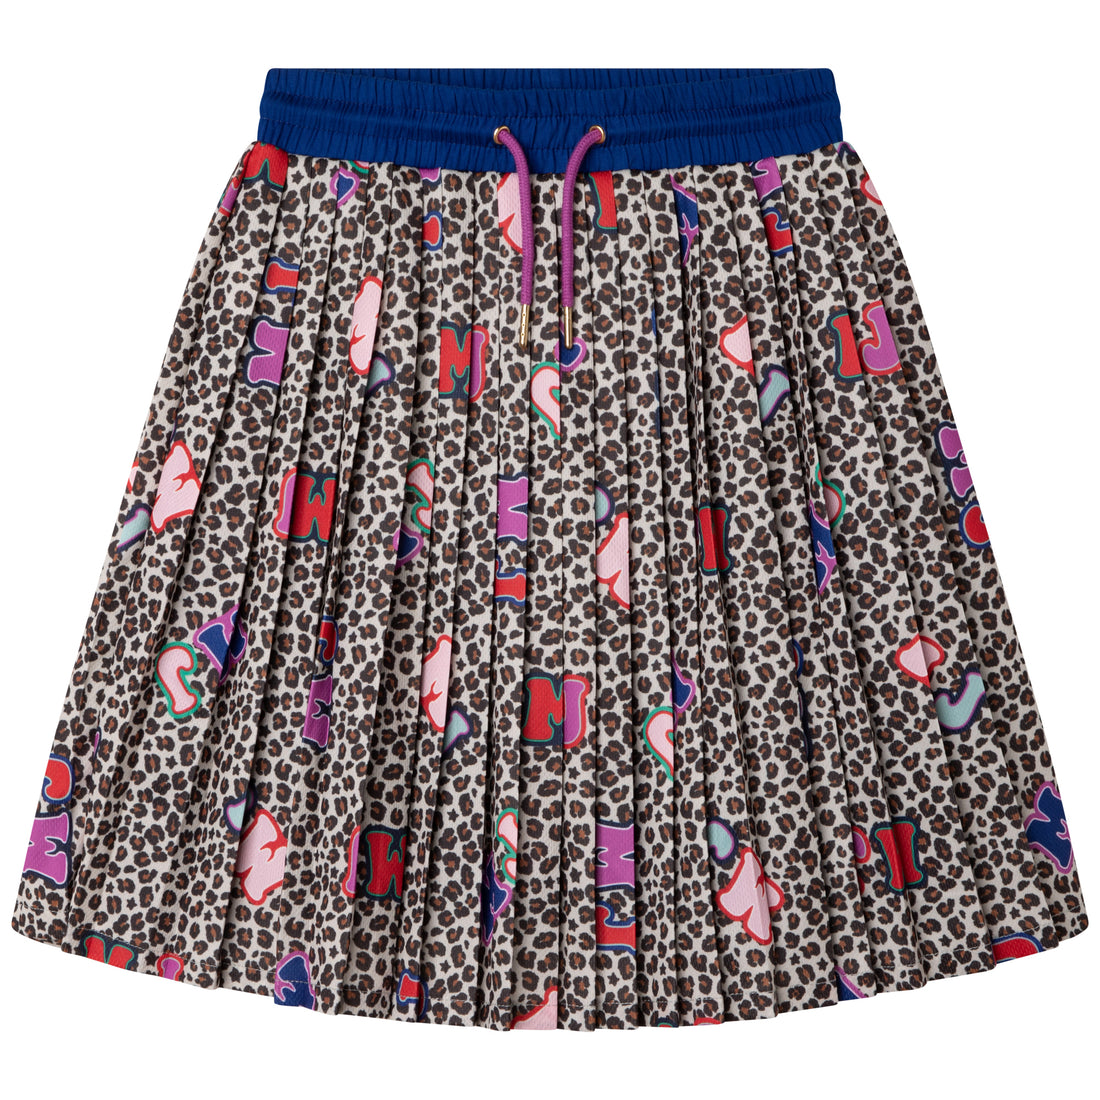 The Marc Jacobs Pleated Skirt Style: W13130